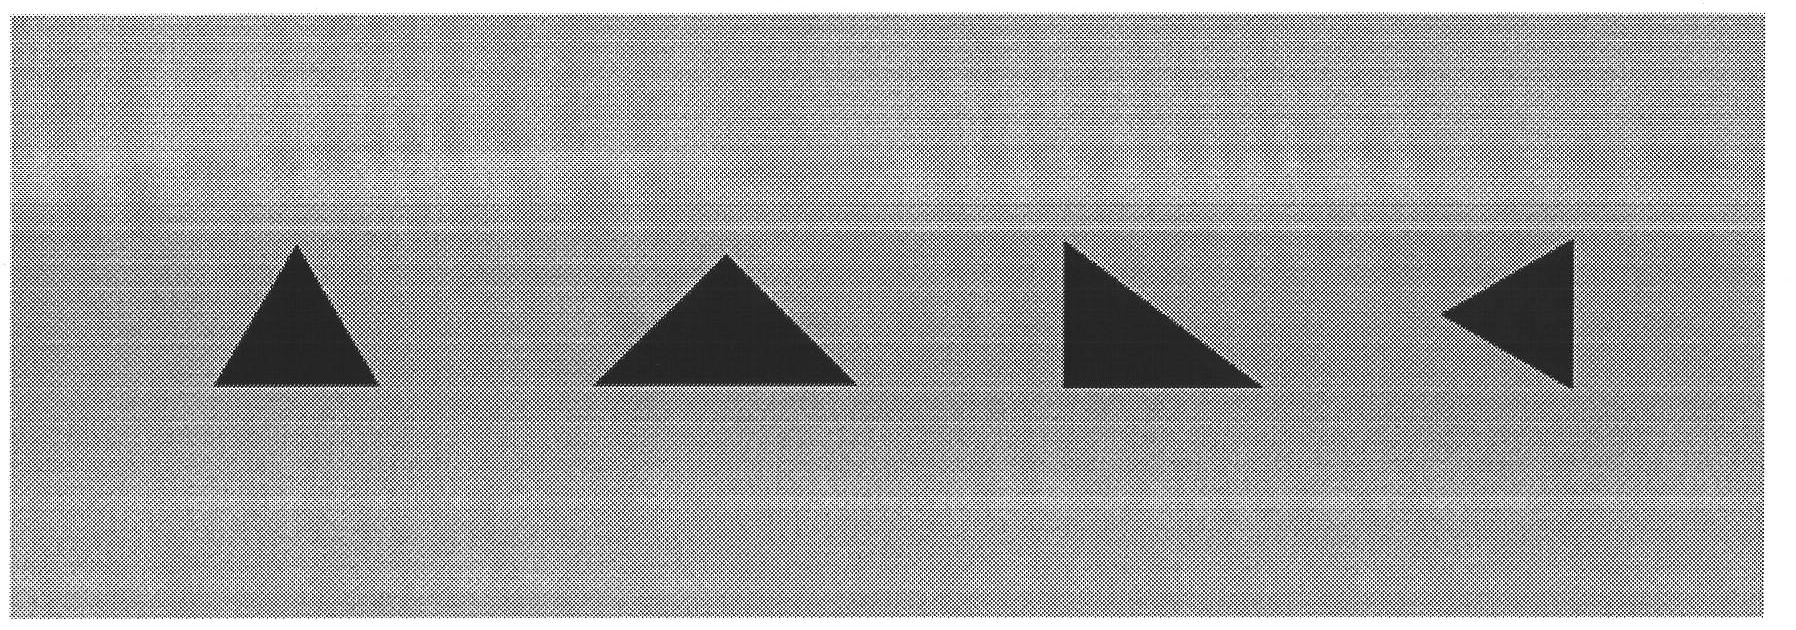 Method for detecting oblique triangle in digital image